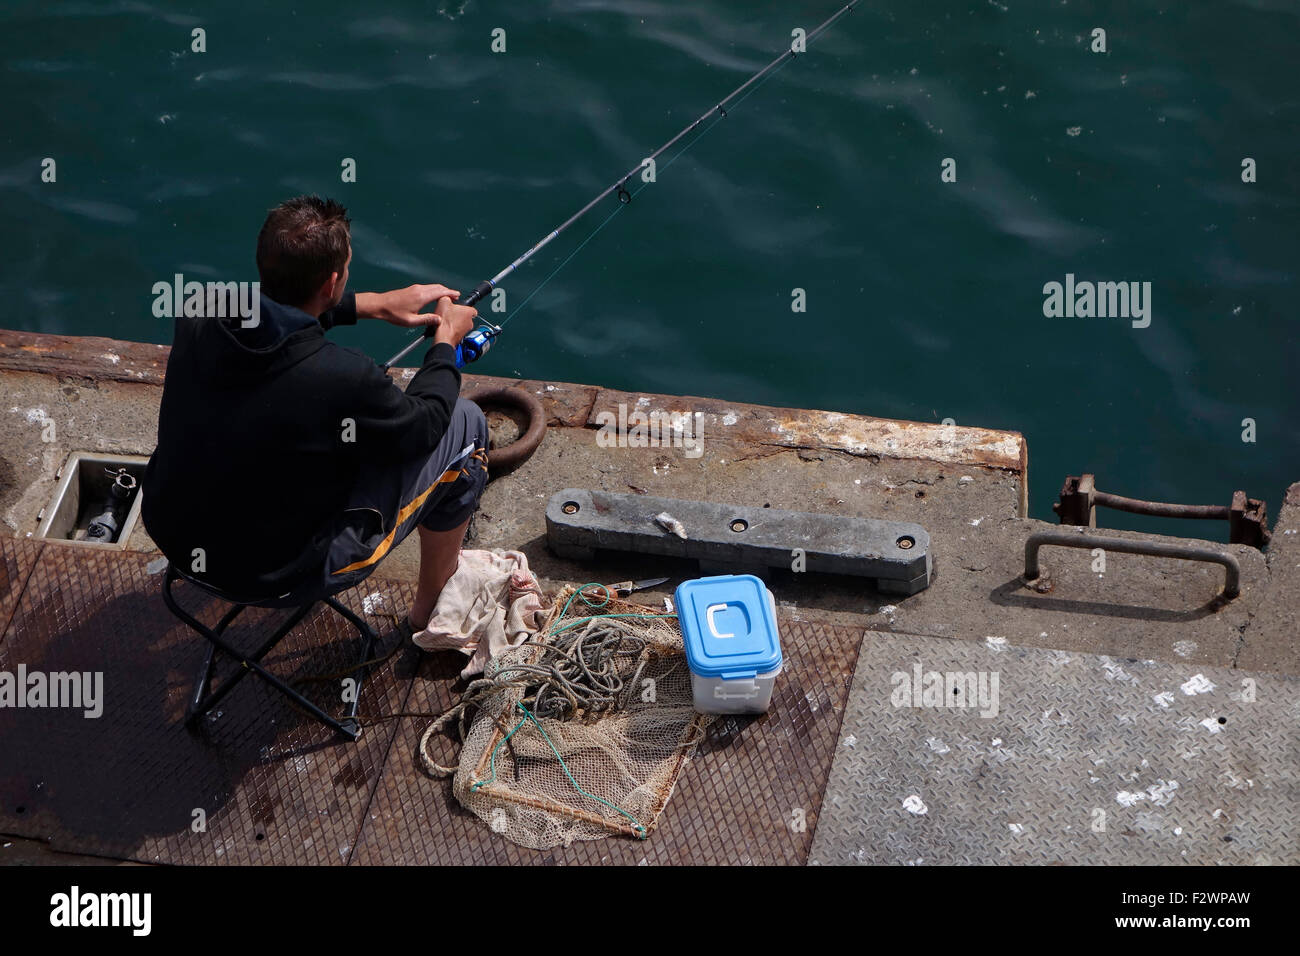 Angler / fisherman with fishing rod catching fish from quay in harbour Stock Photo